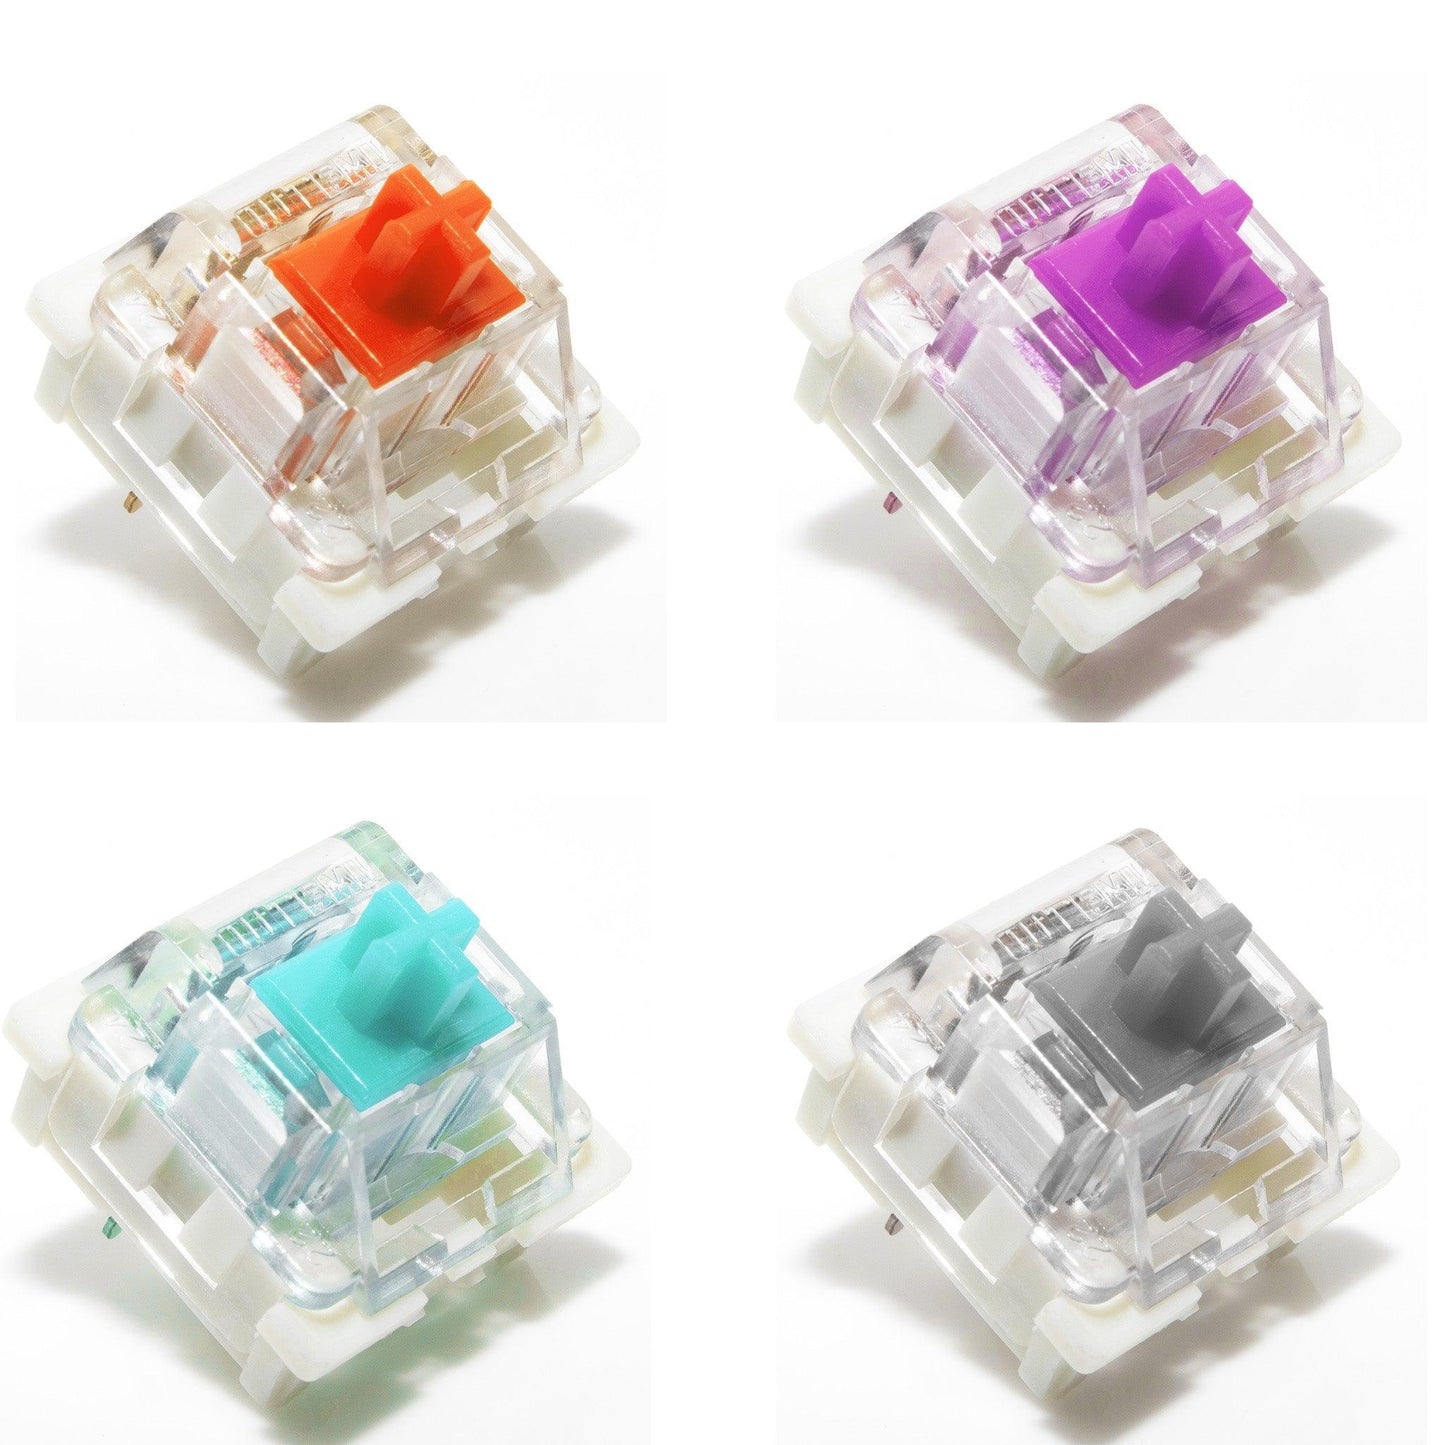 Outemu Linear Tactile Clickly SMD Mechanical Keyboard Switch Cherry MX Replacement Switches OUTMEU   